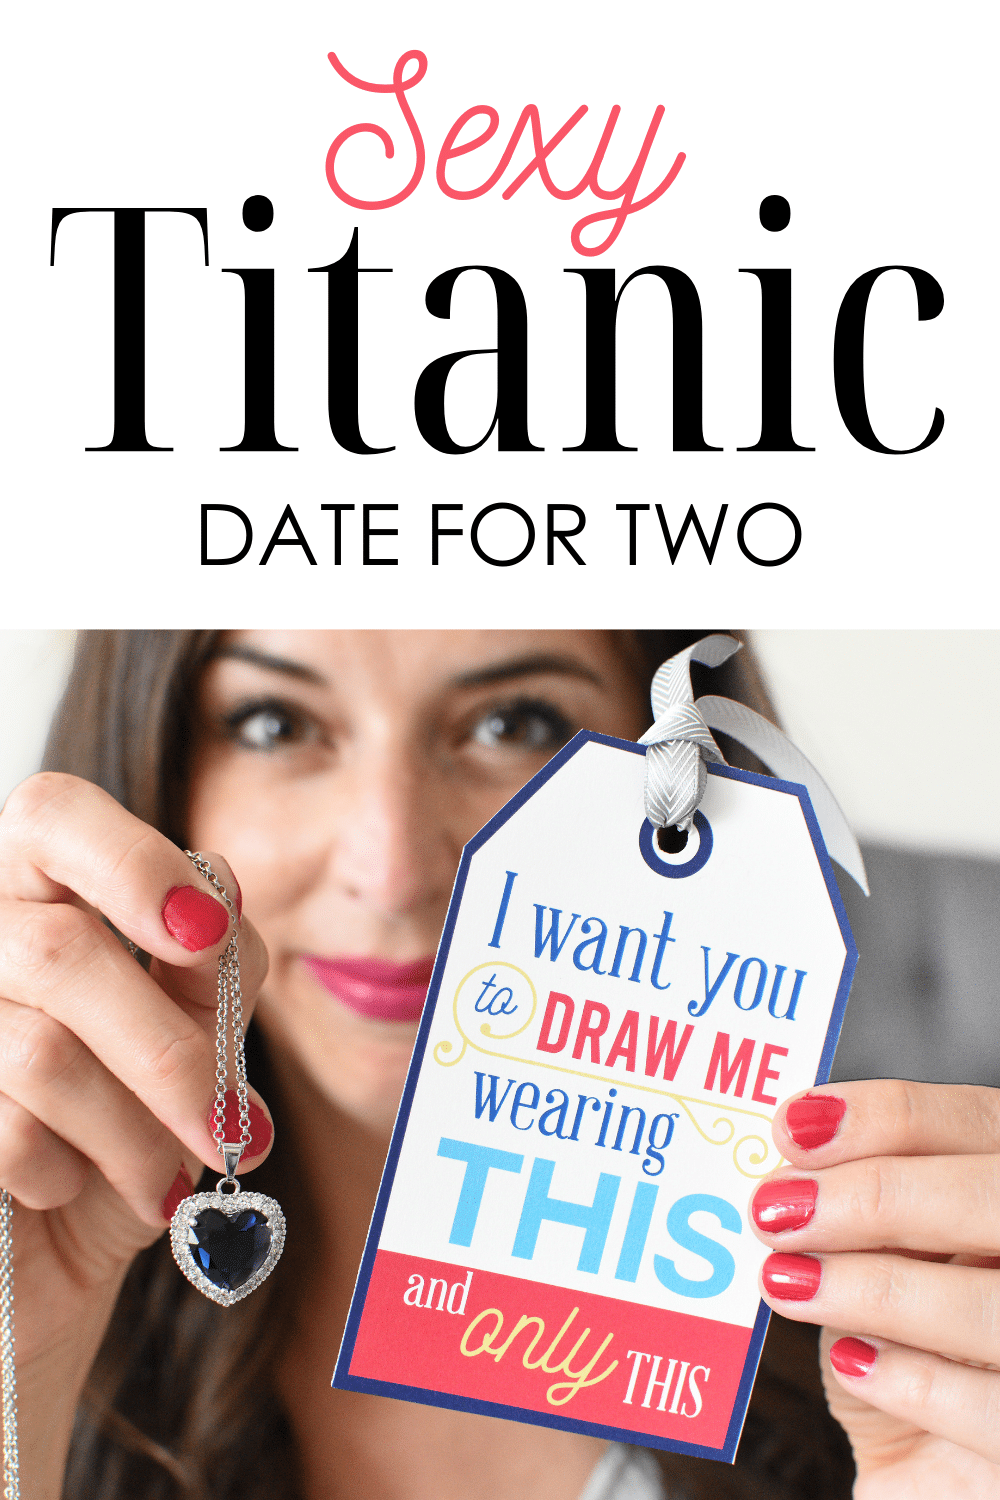 My husband will totally be on board for recreating that sexy scene from the Titanic movie. Love this! #datenight #titanicdate #sexydate